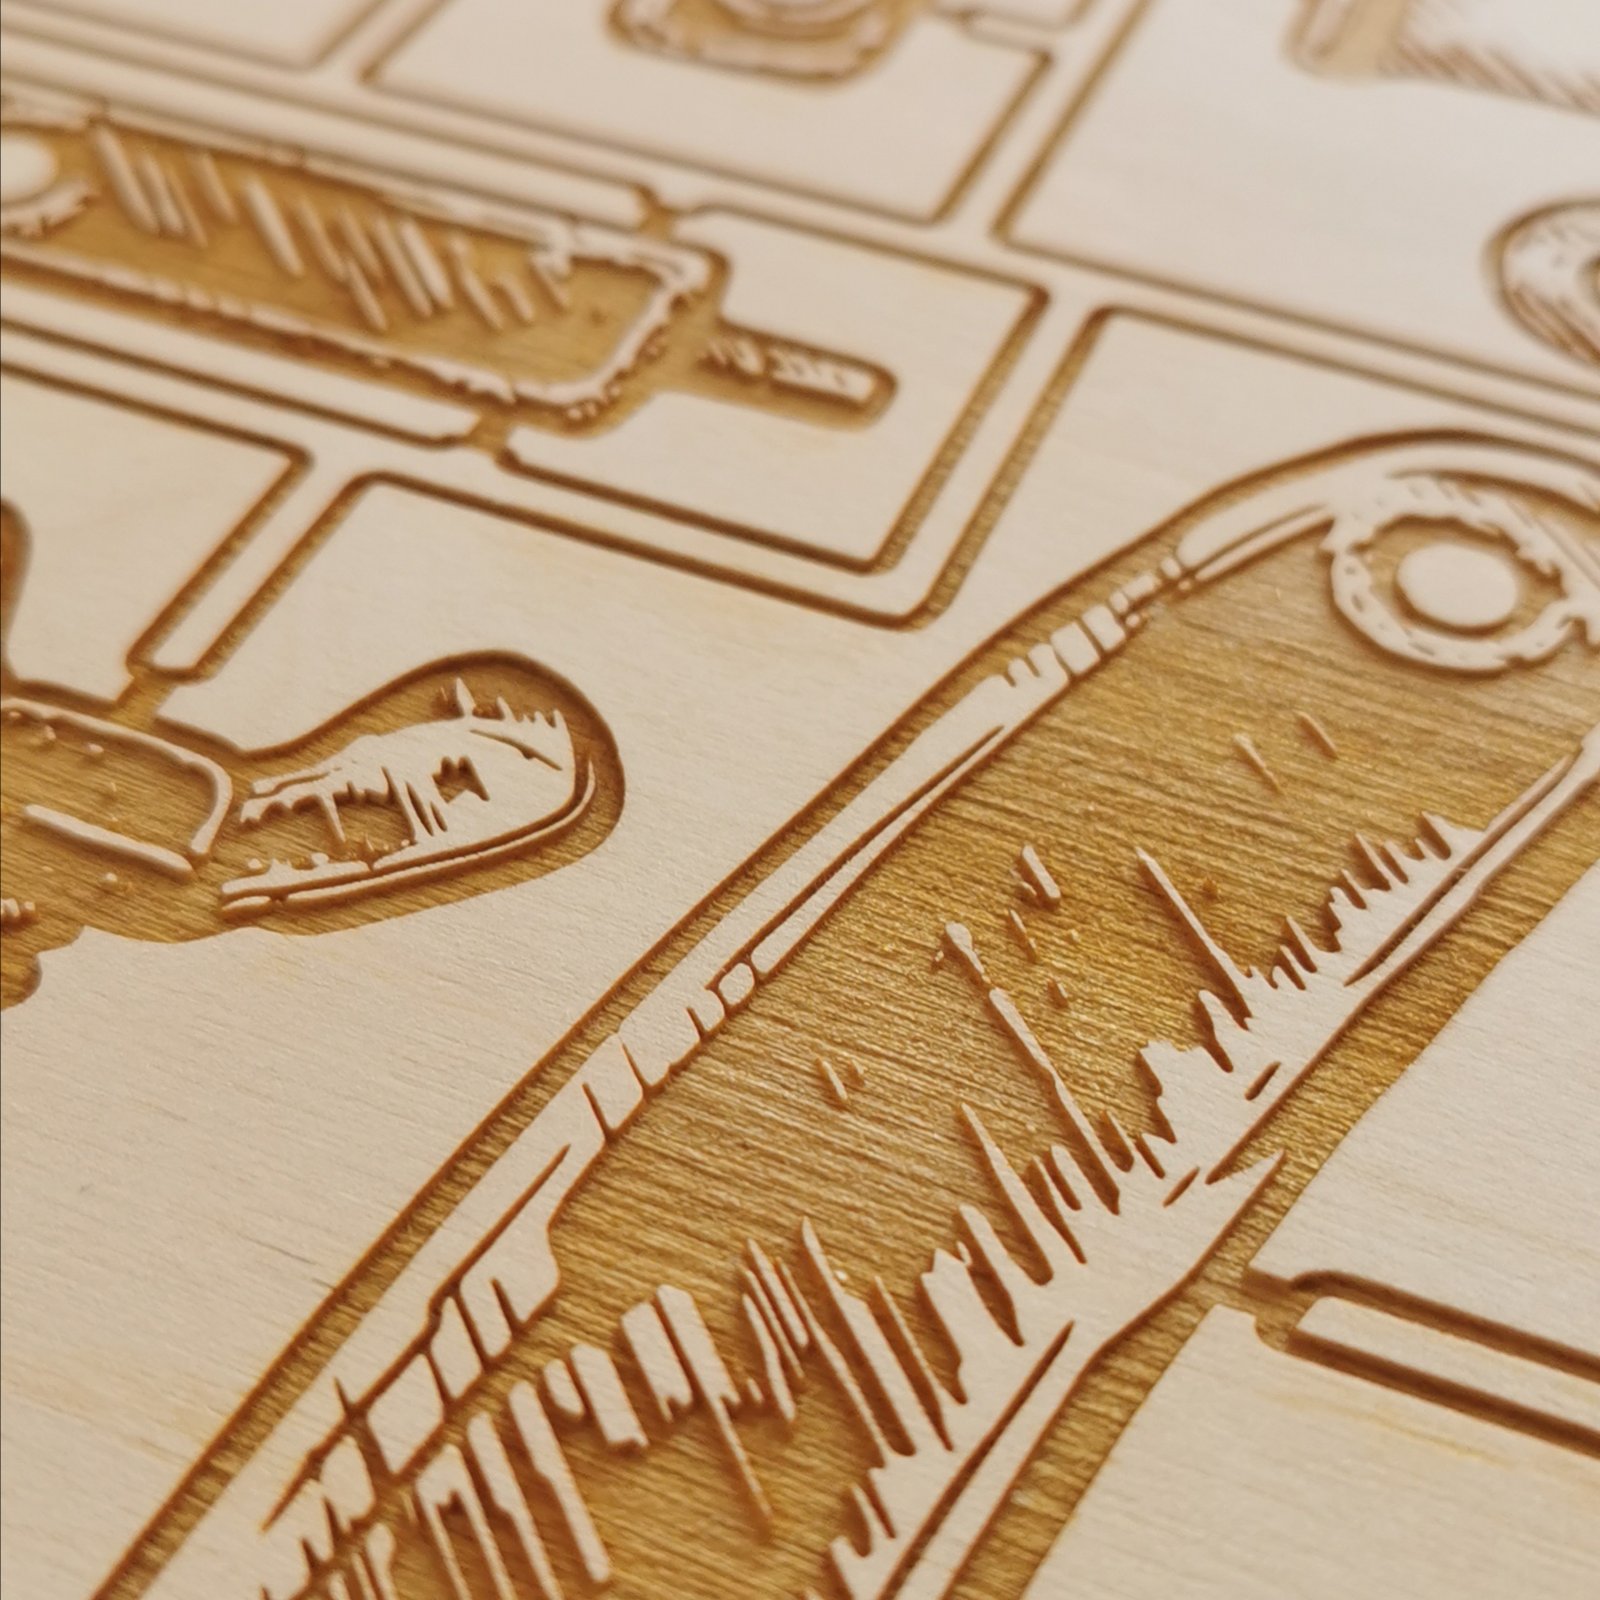 How To Give Yourself a DIY Laser Cut Tattoo